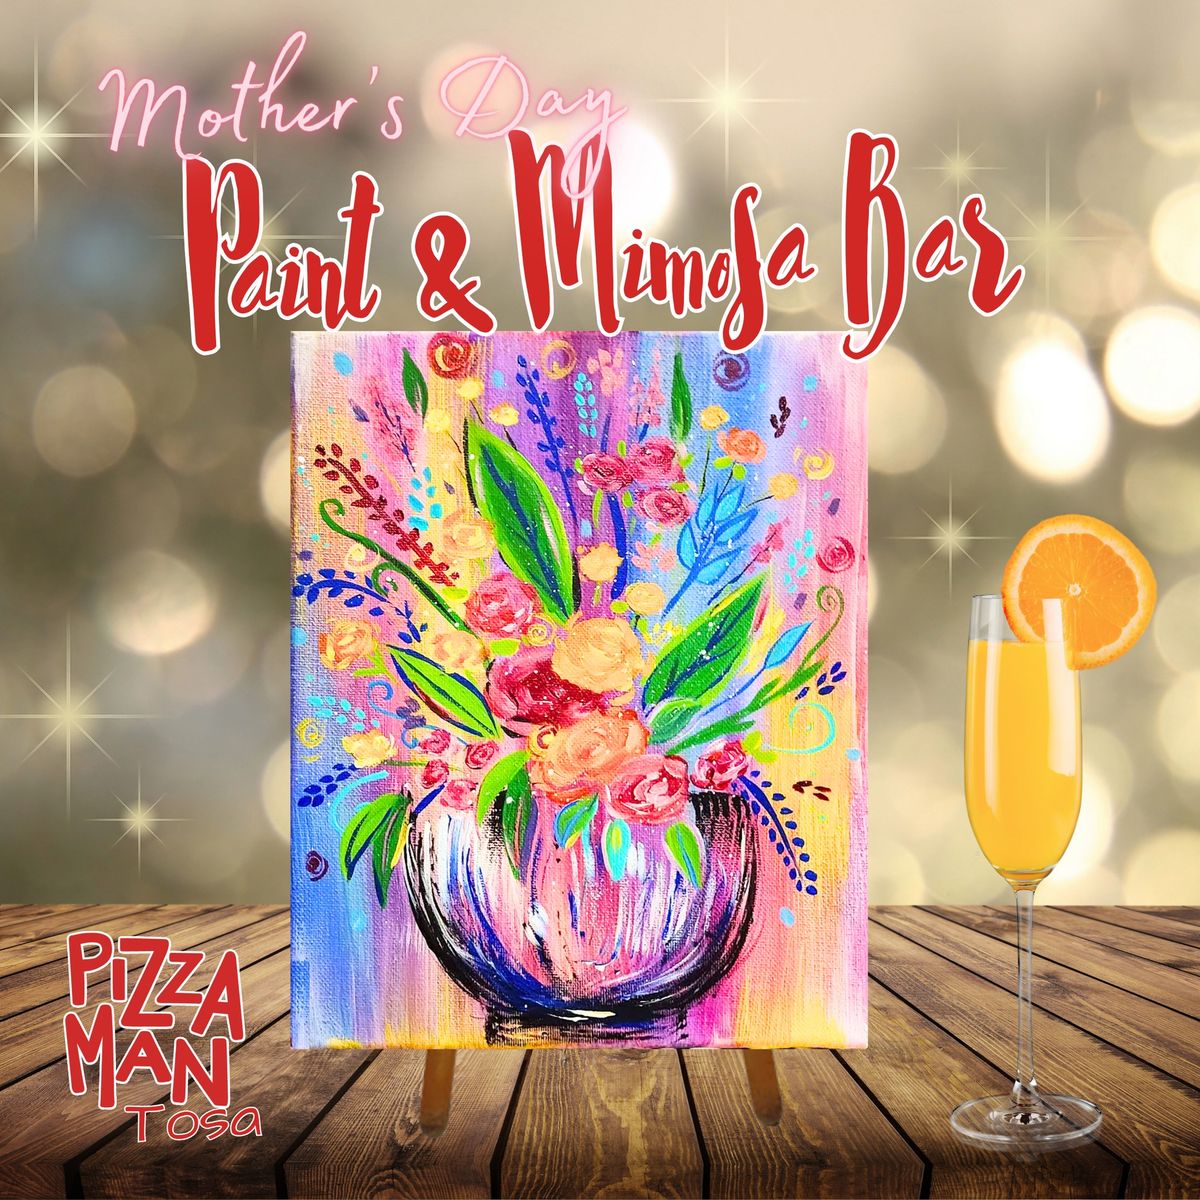 Pizza Man (Wauwatosa) Mother's Day Paint & Mimosa Bar!